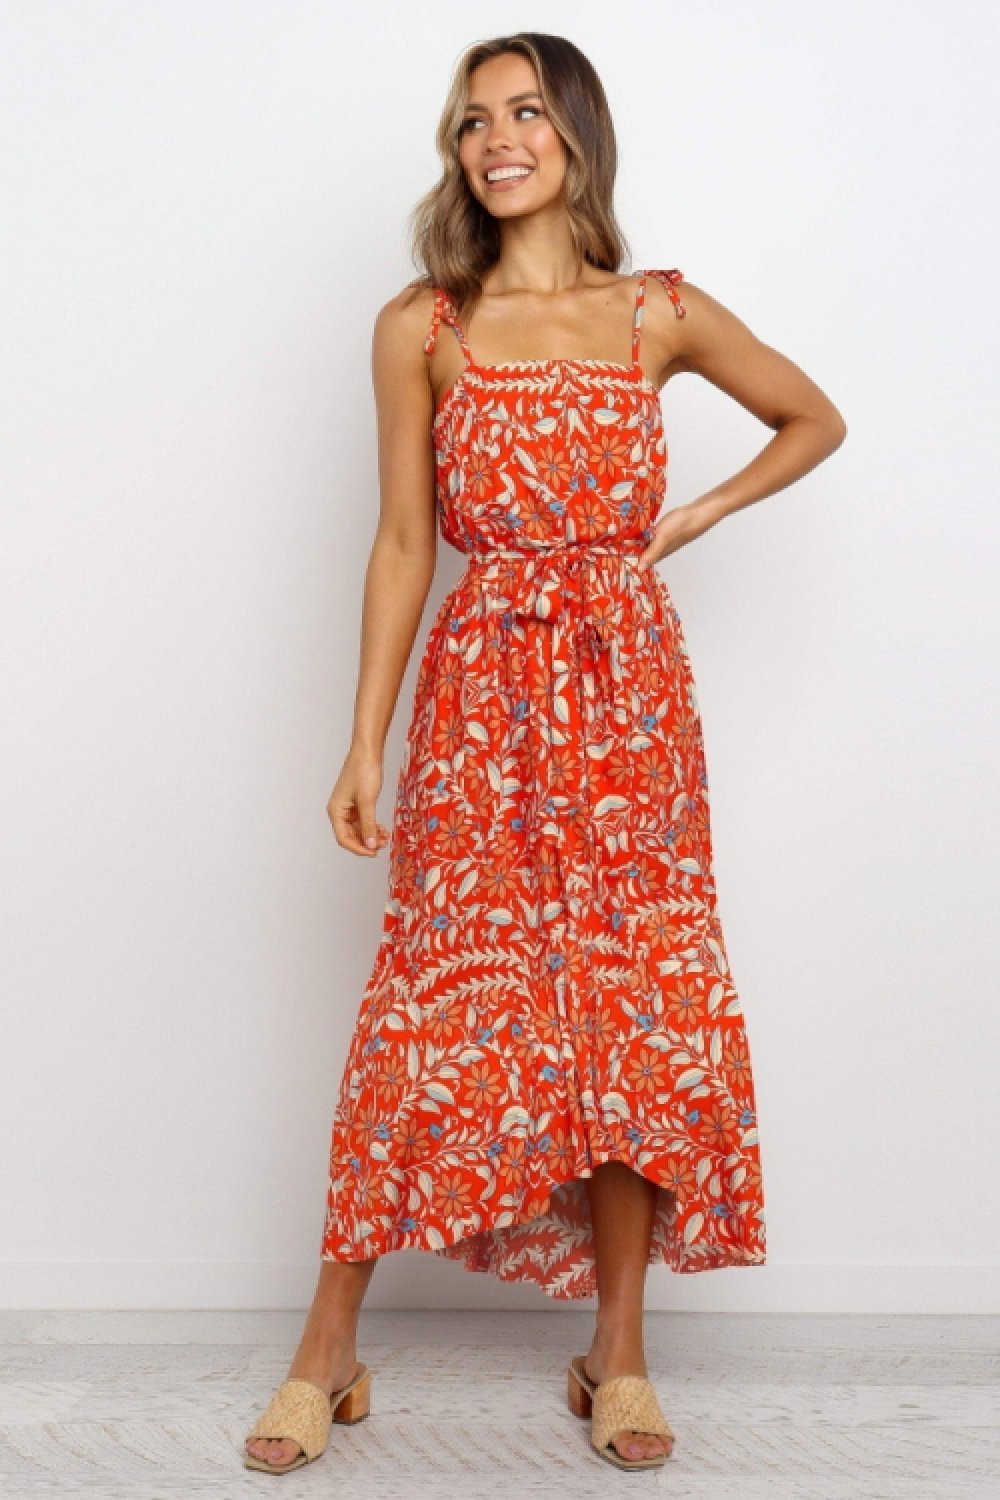 Just The Beginning Floral Dress - Pavacat